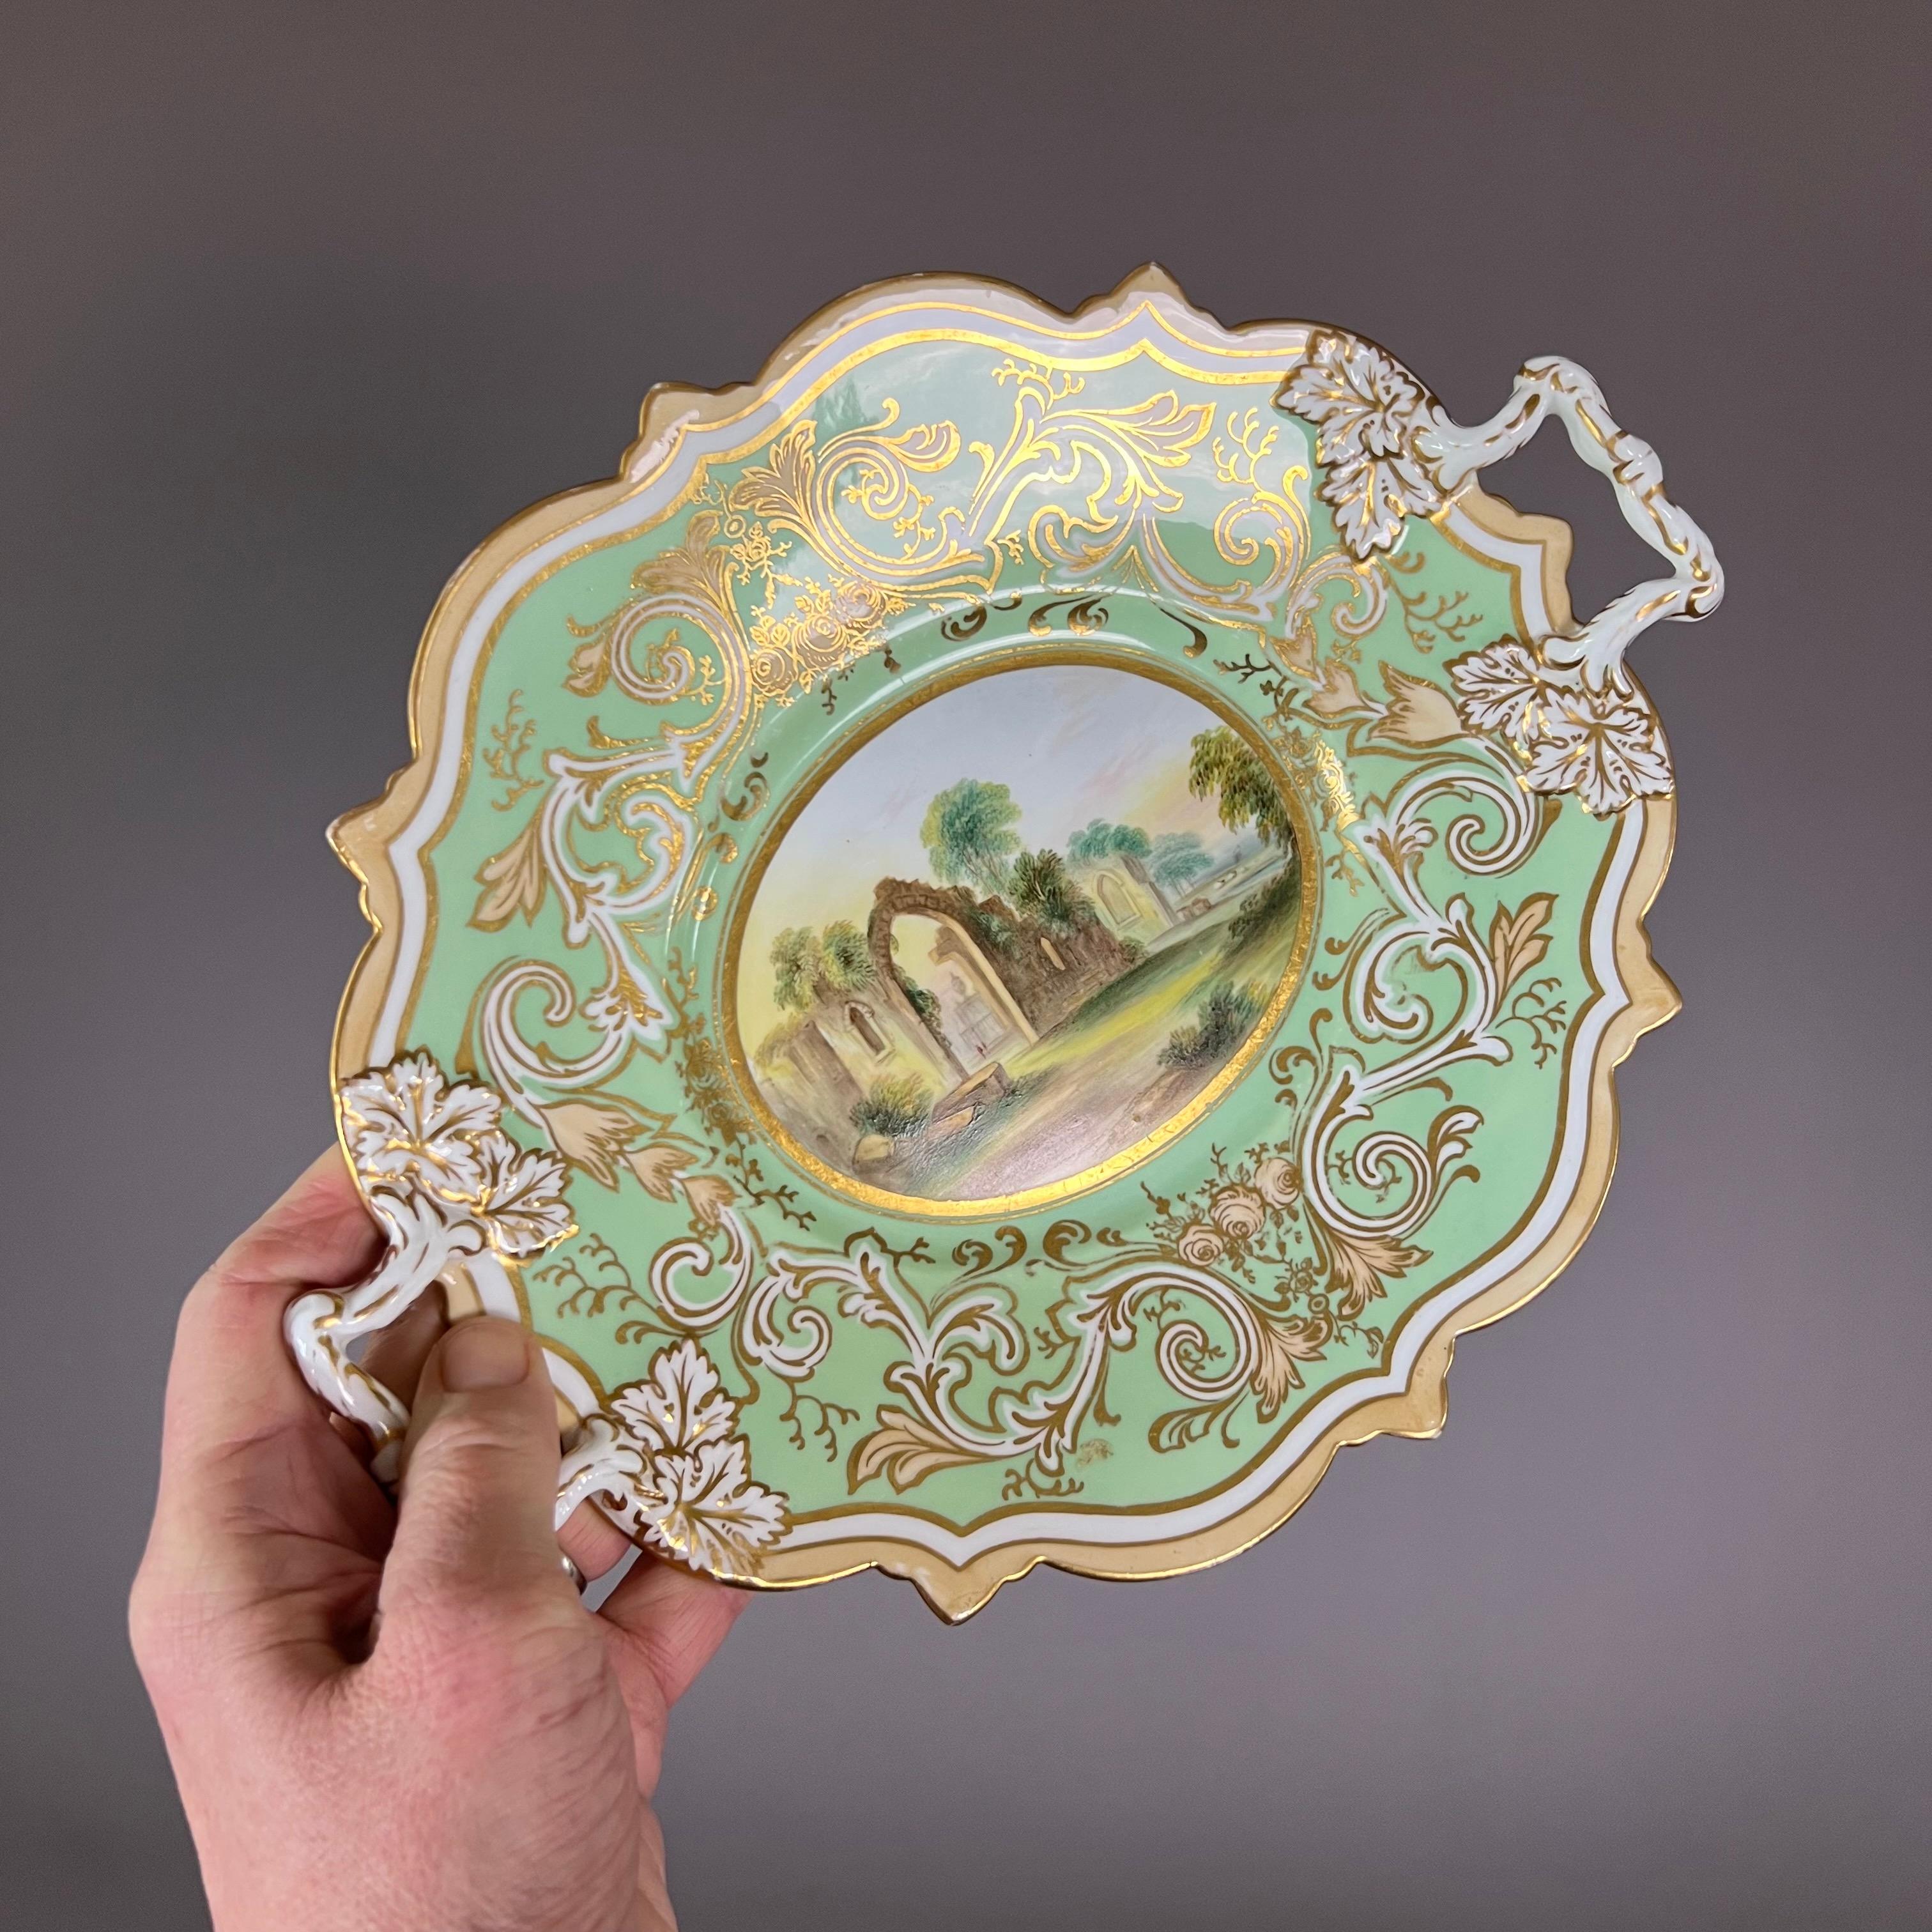 An oval low-footed comport with two handles and an octagonally scrolled shape, a moulded surface with pale yellow and white scrolling foliage on a sage green ground, and a stunning landscape in the centre of a ruin with two visitors

Pattern